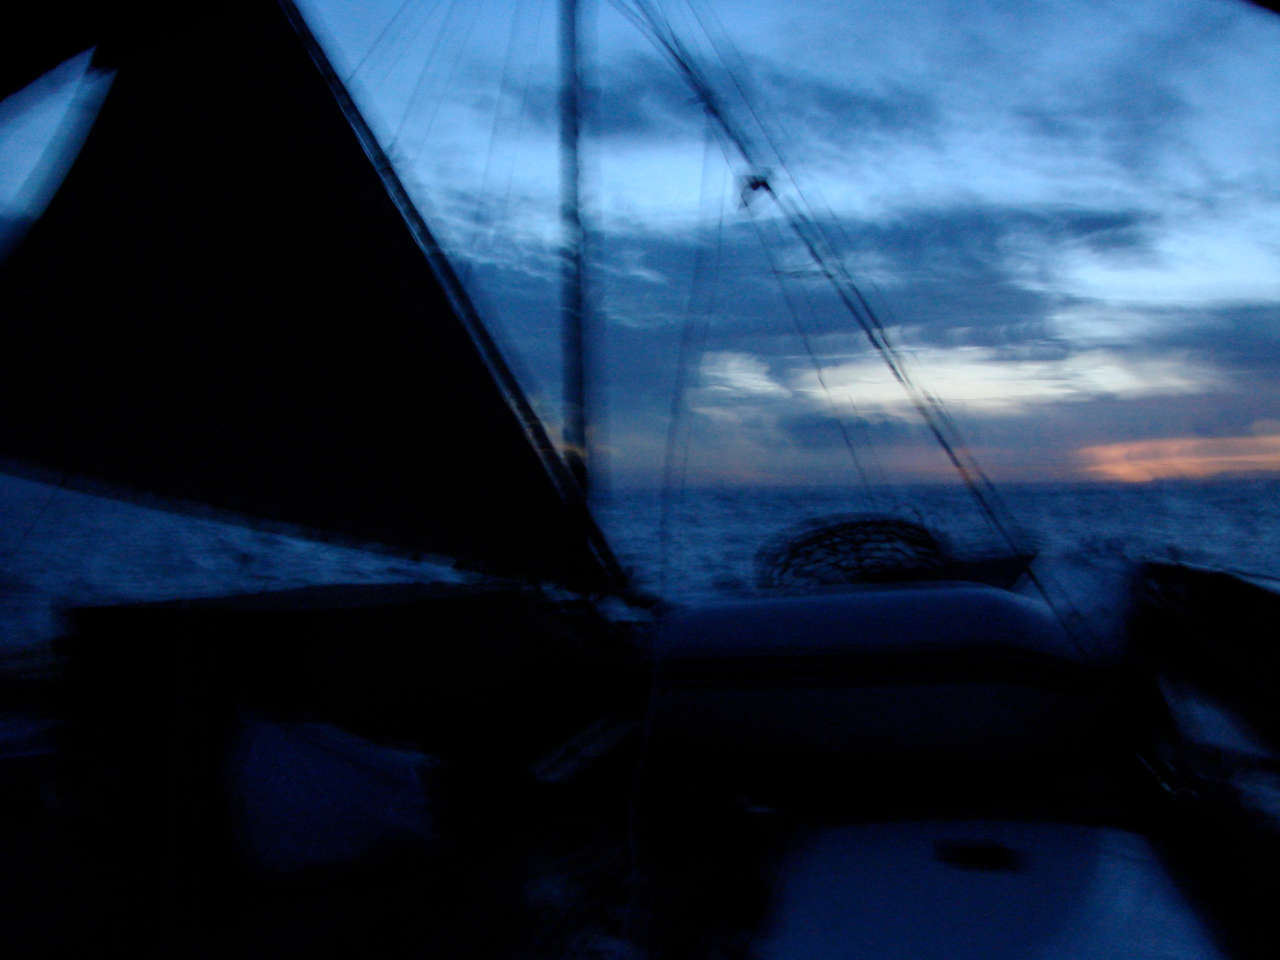 Sunrise from the boat